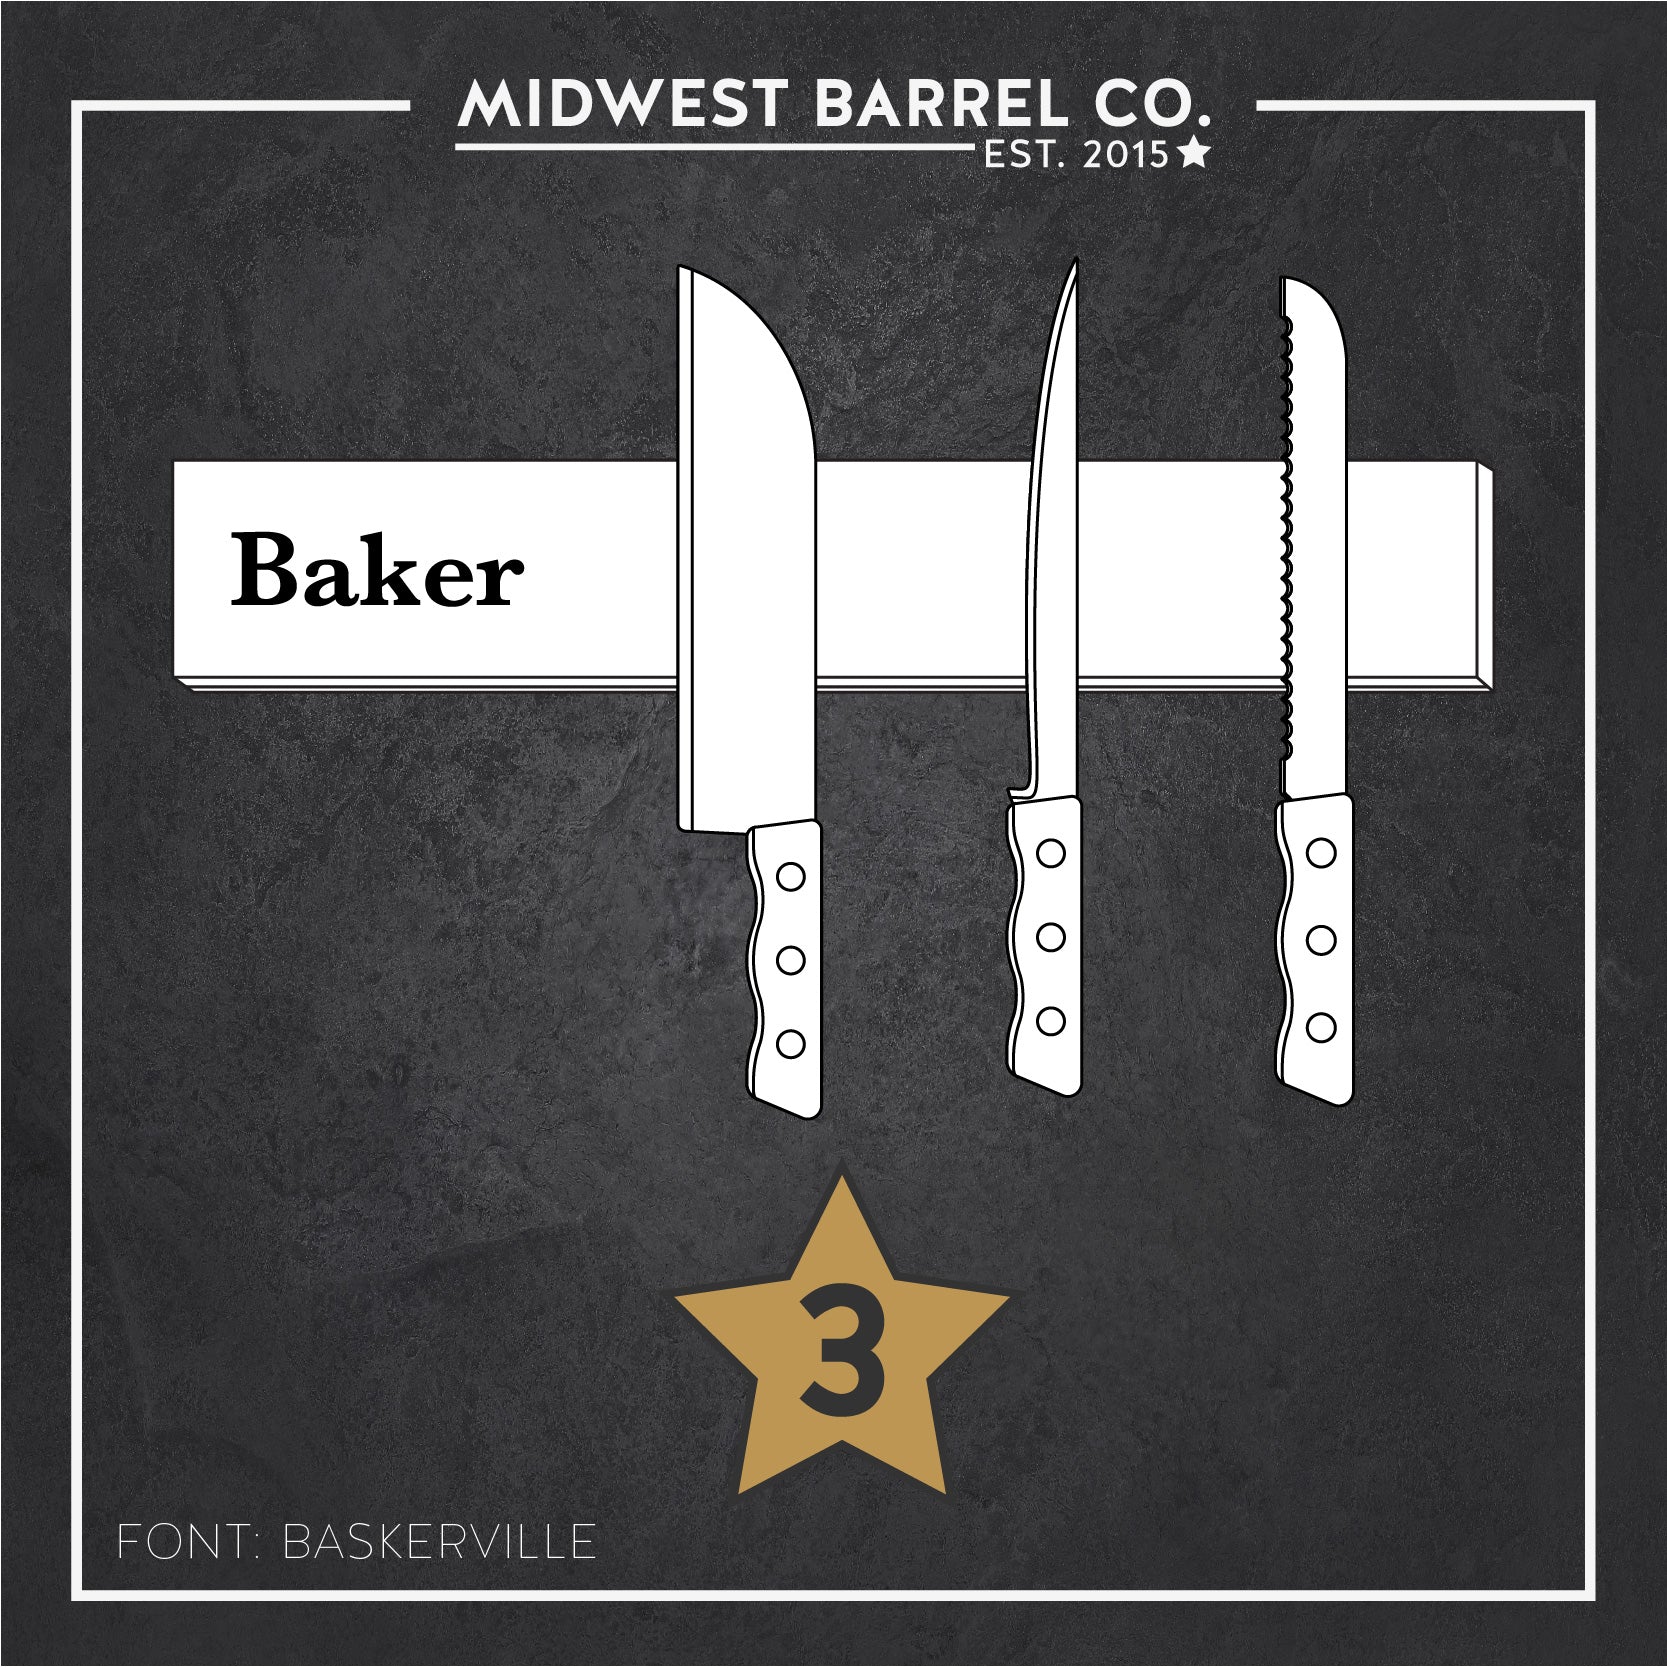 Option 3: Whiskey barrel stave knife block image with three knives and Baker font